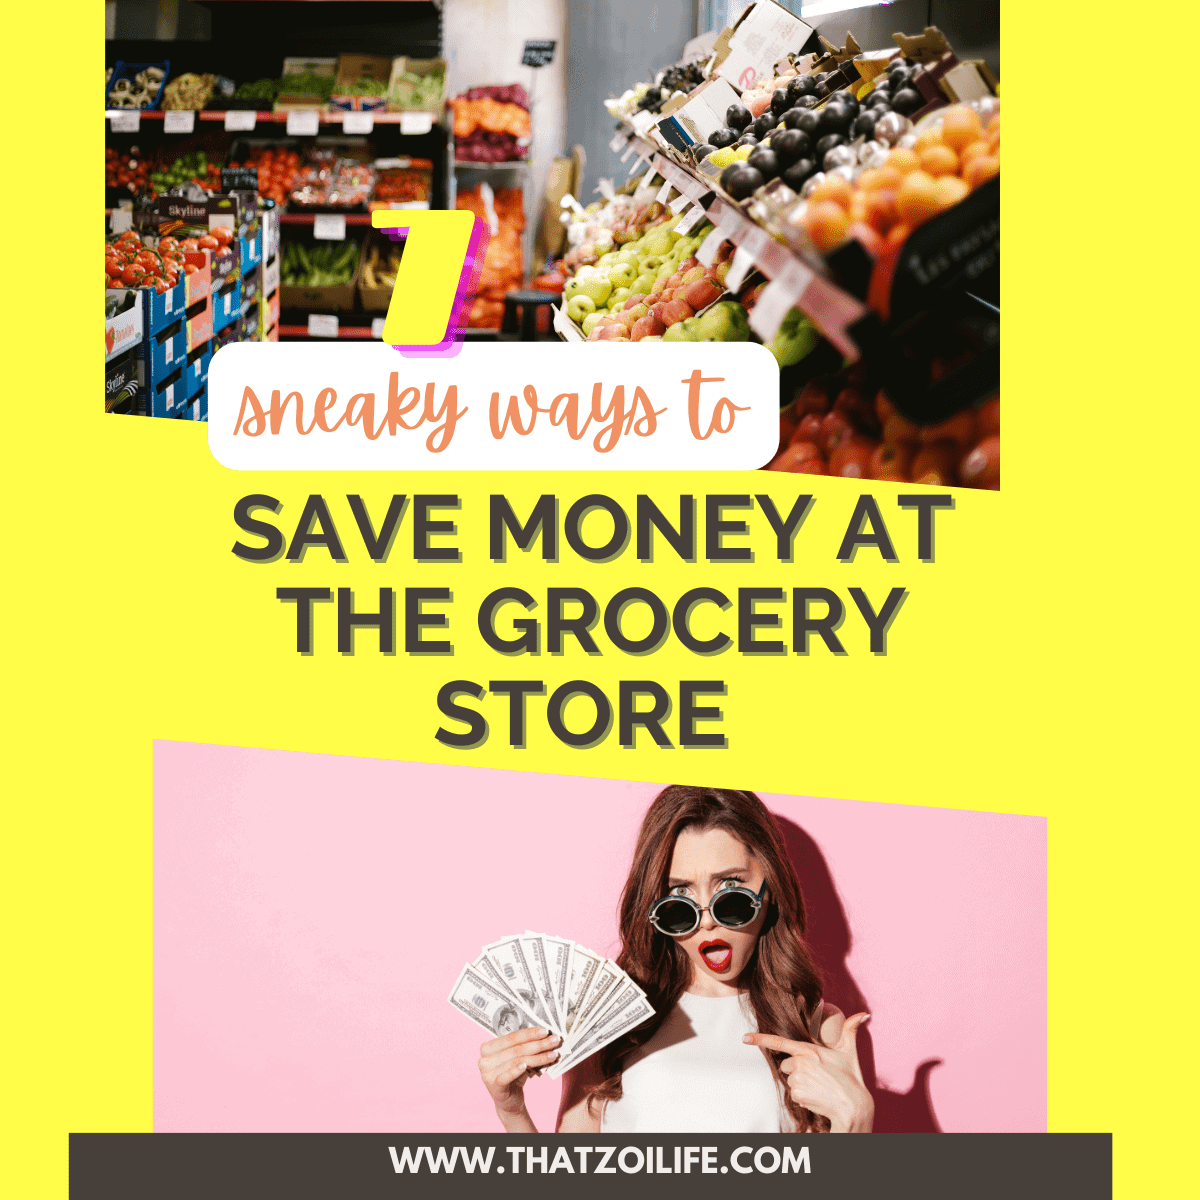 An image of the produce section at the grocery store, and an image of a young white woman looking shocked and holding a stack of money. Text reads "7 sneaky ways to save money at the grocery store. www.ThatZoiLife,com"